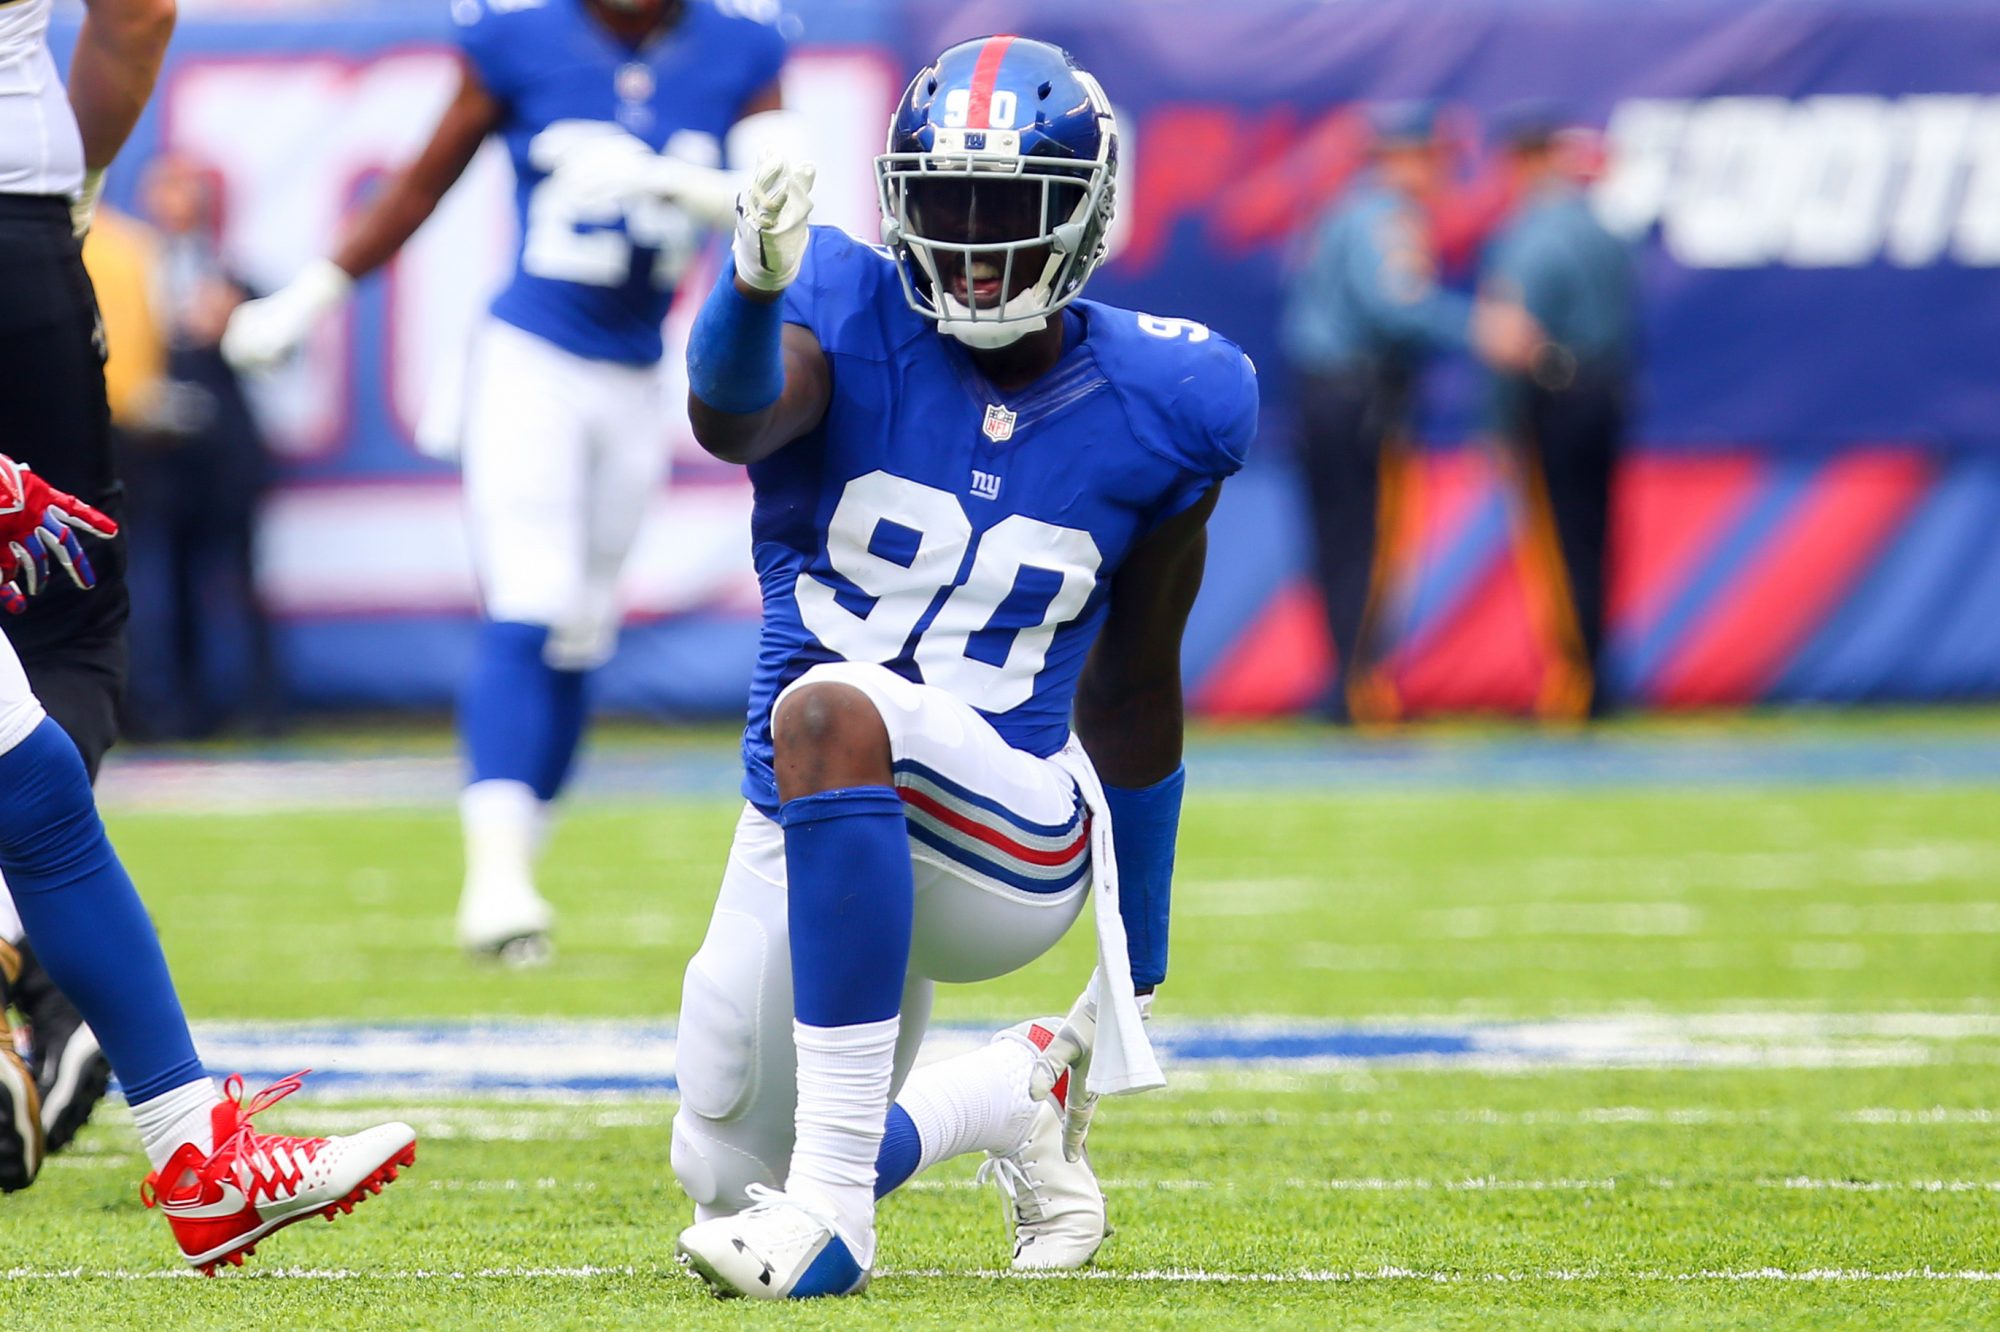 Franchise Tagging Jason Pierre-Paul Proves the New York Giants are all in on 2017 